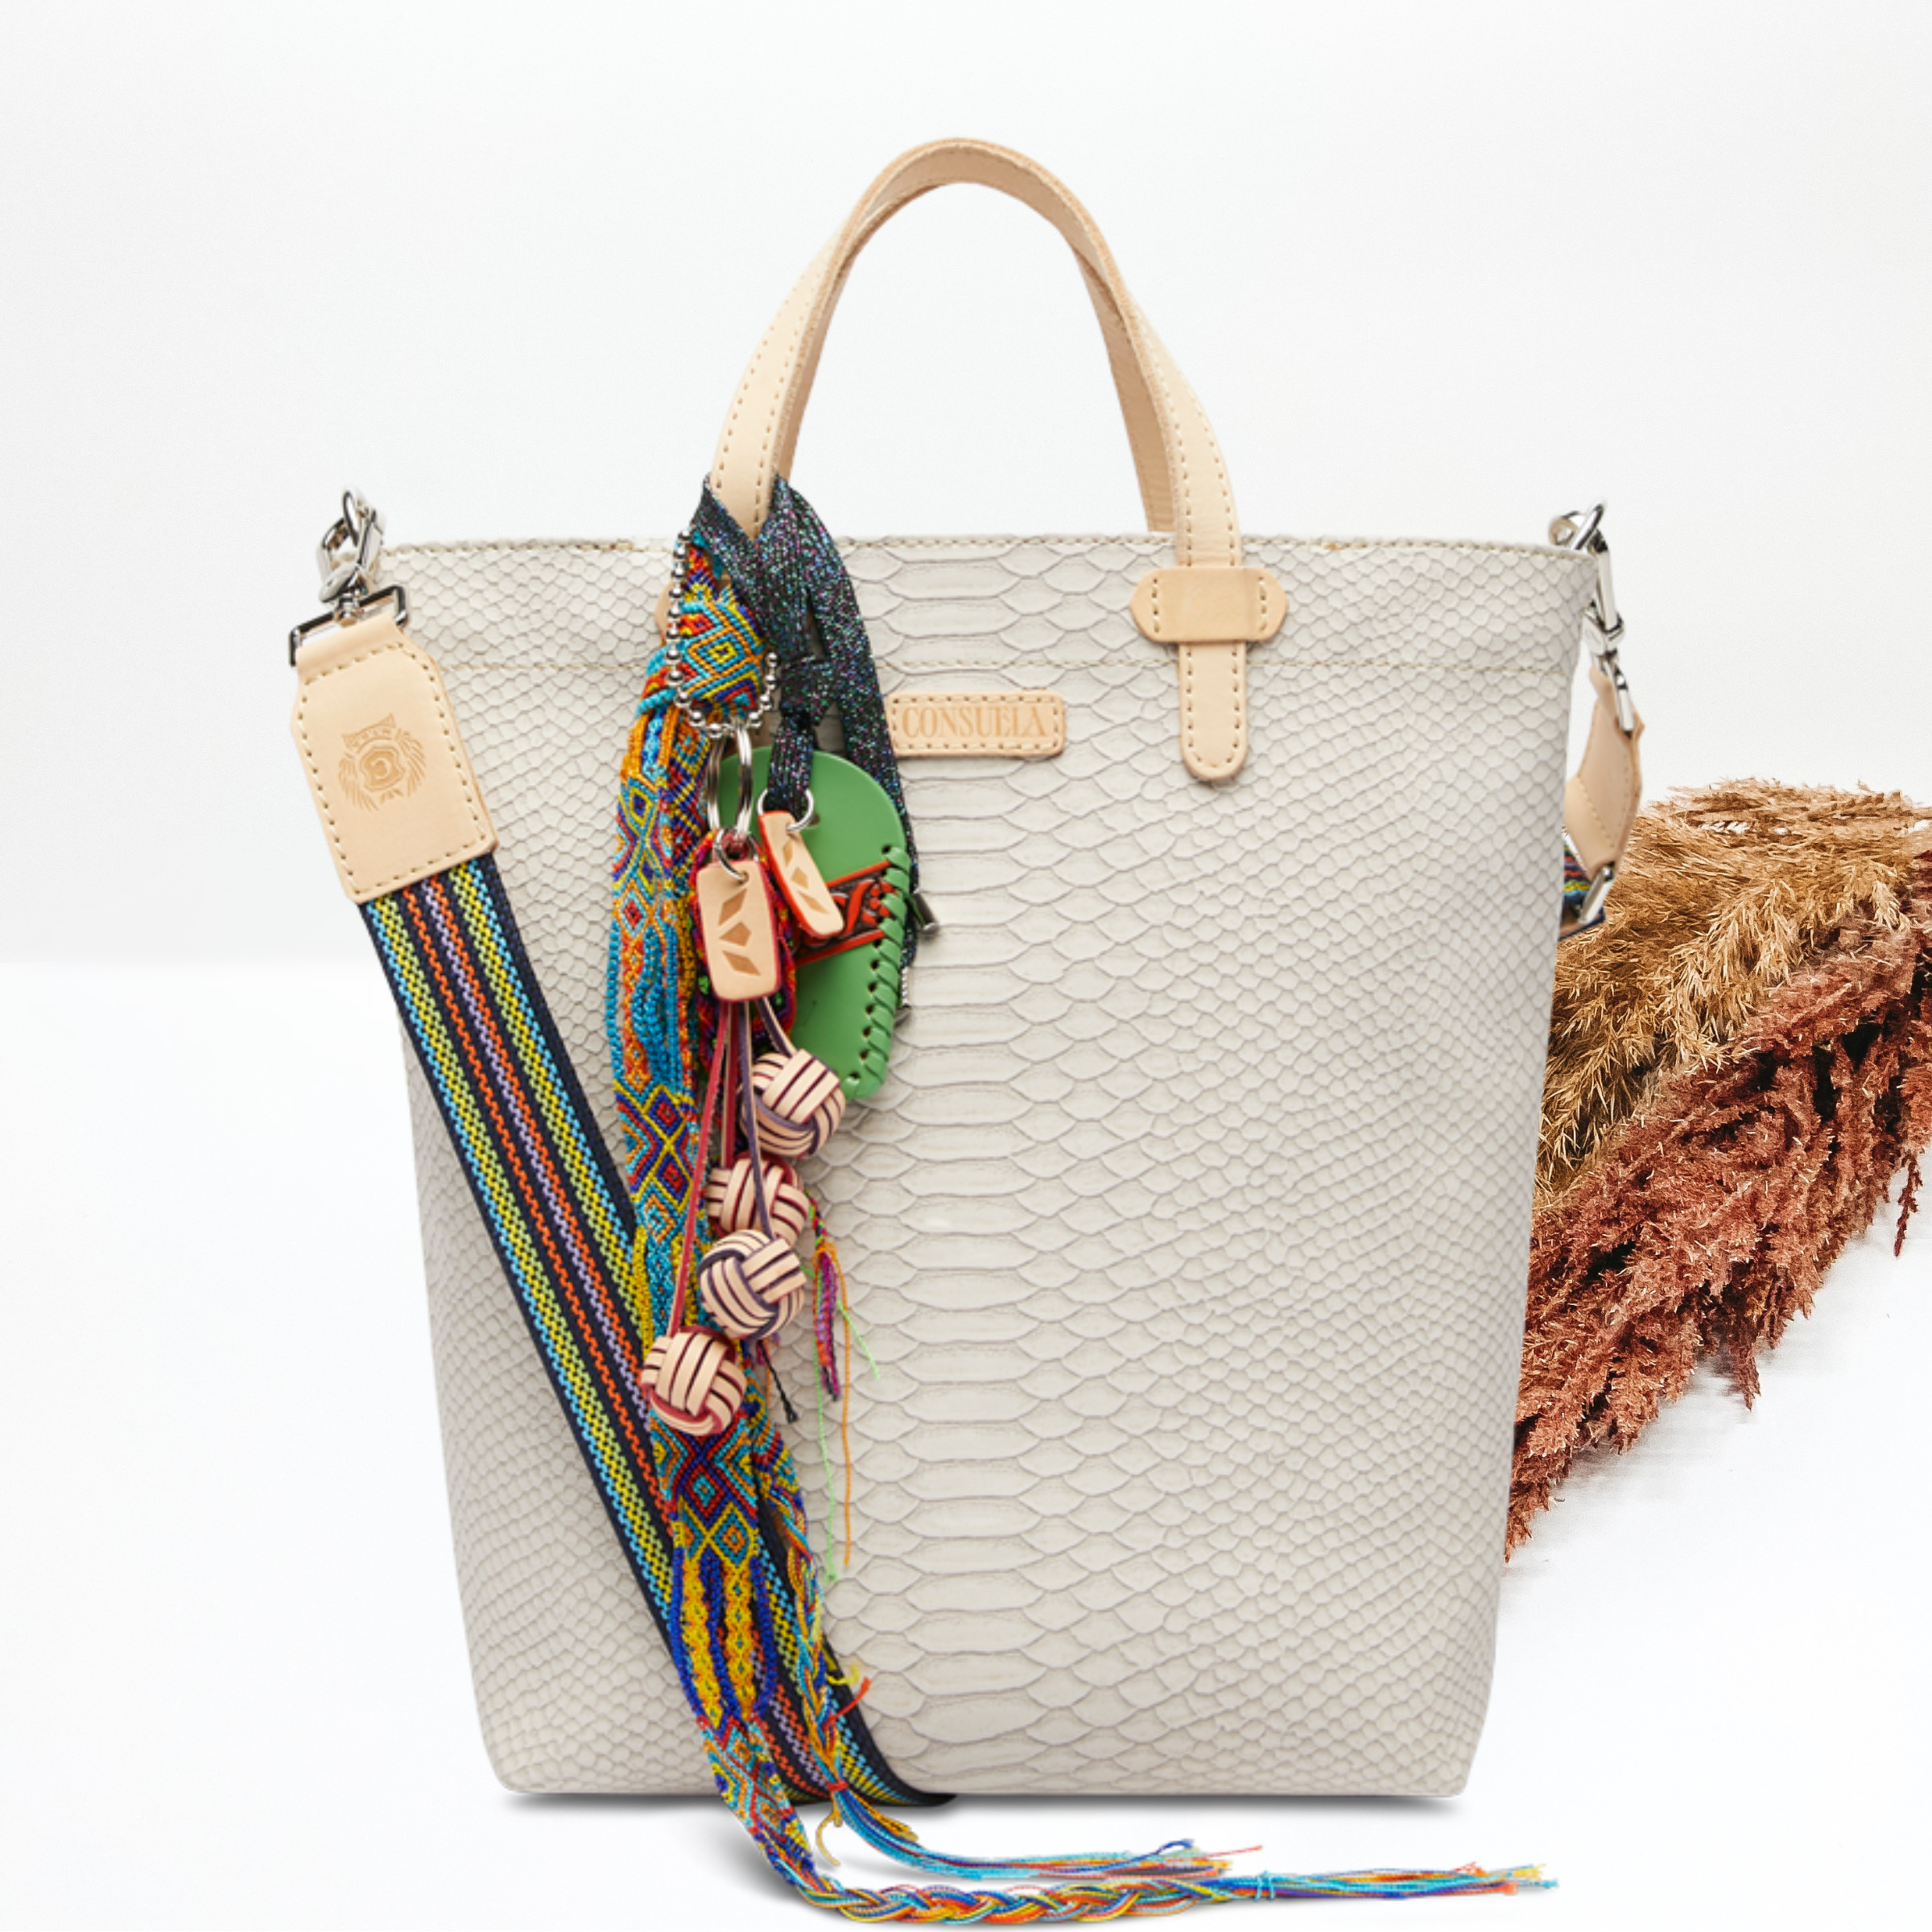 Pictured on a white background is an essential tote bag that has a white snake print. This purse includes a olive and tan charm, a striped purse strap, and light tan handles.